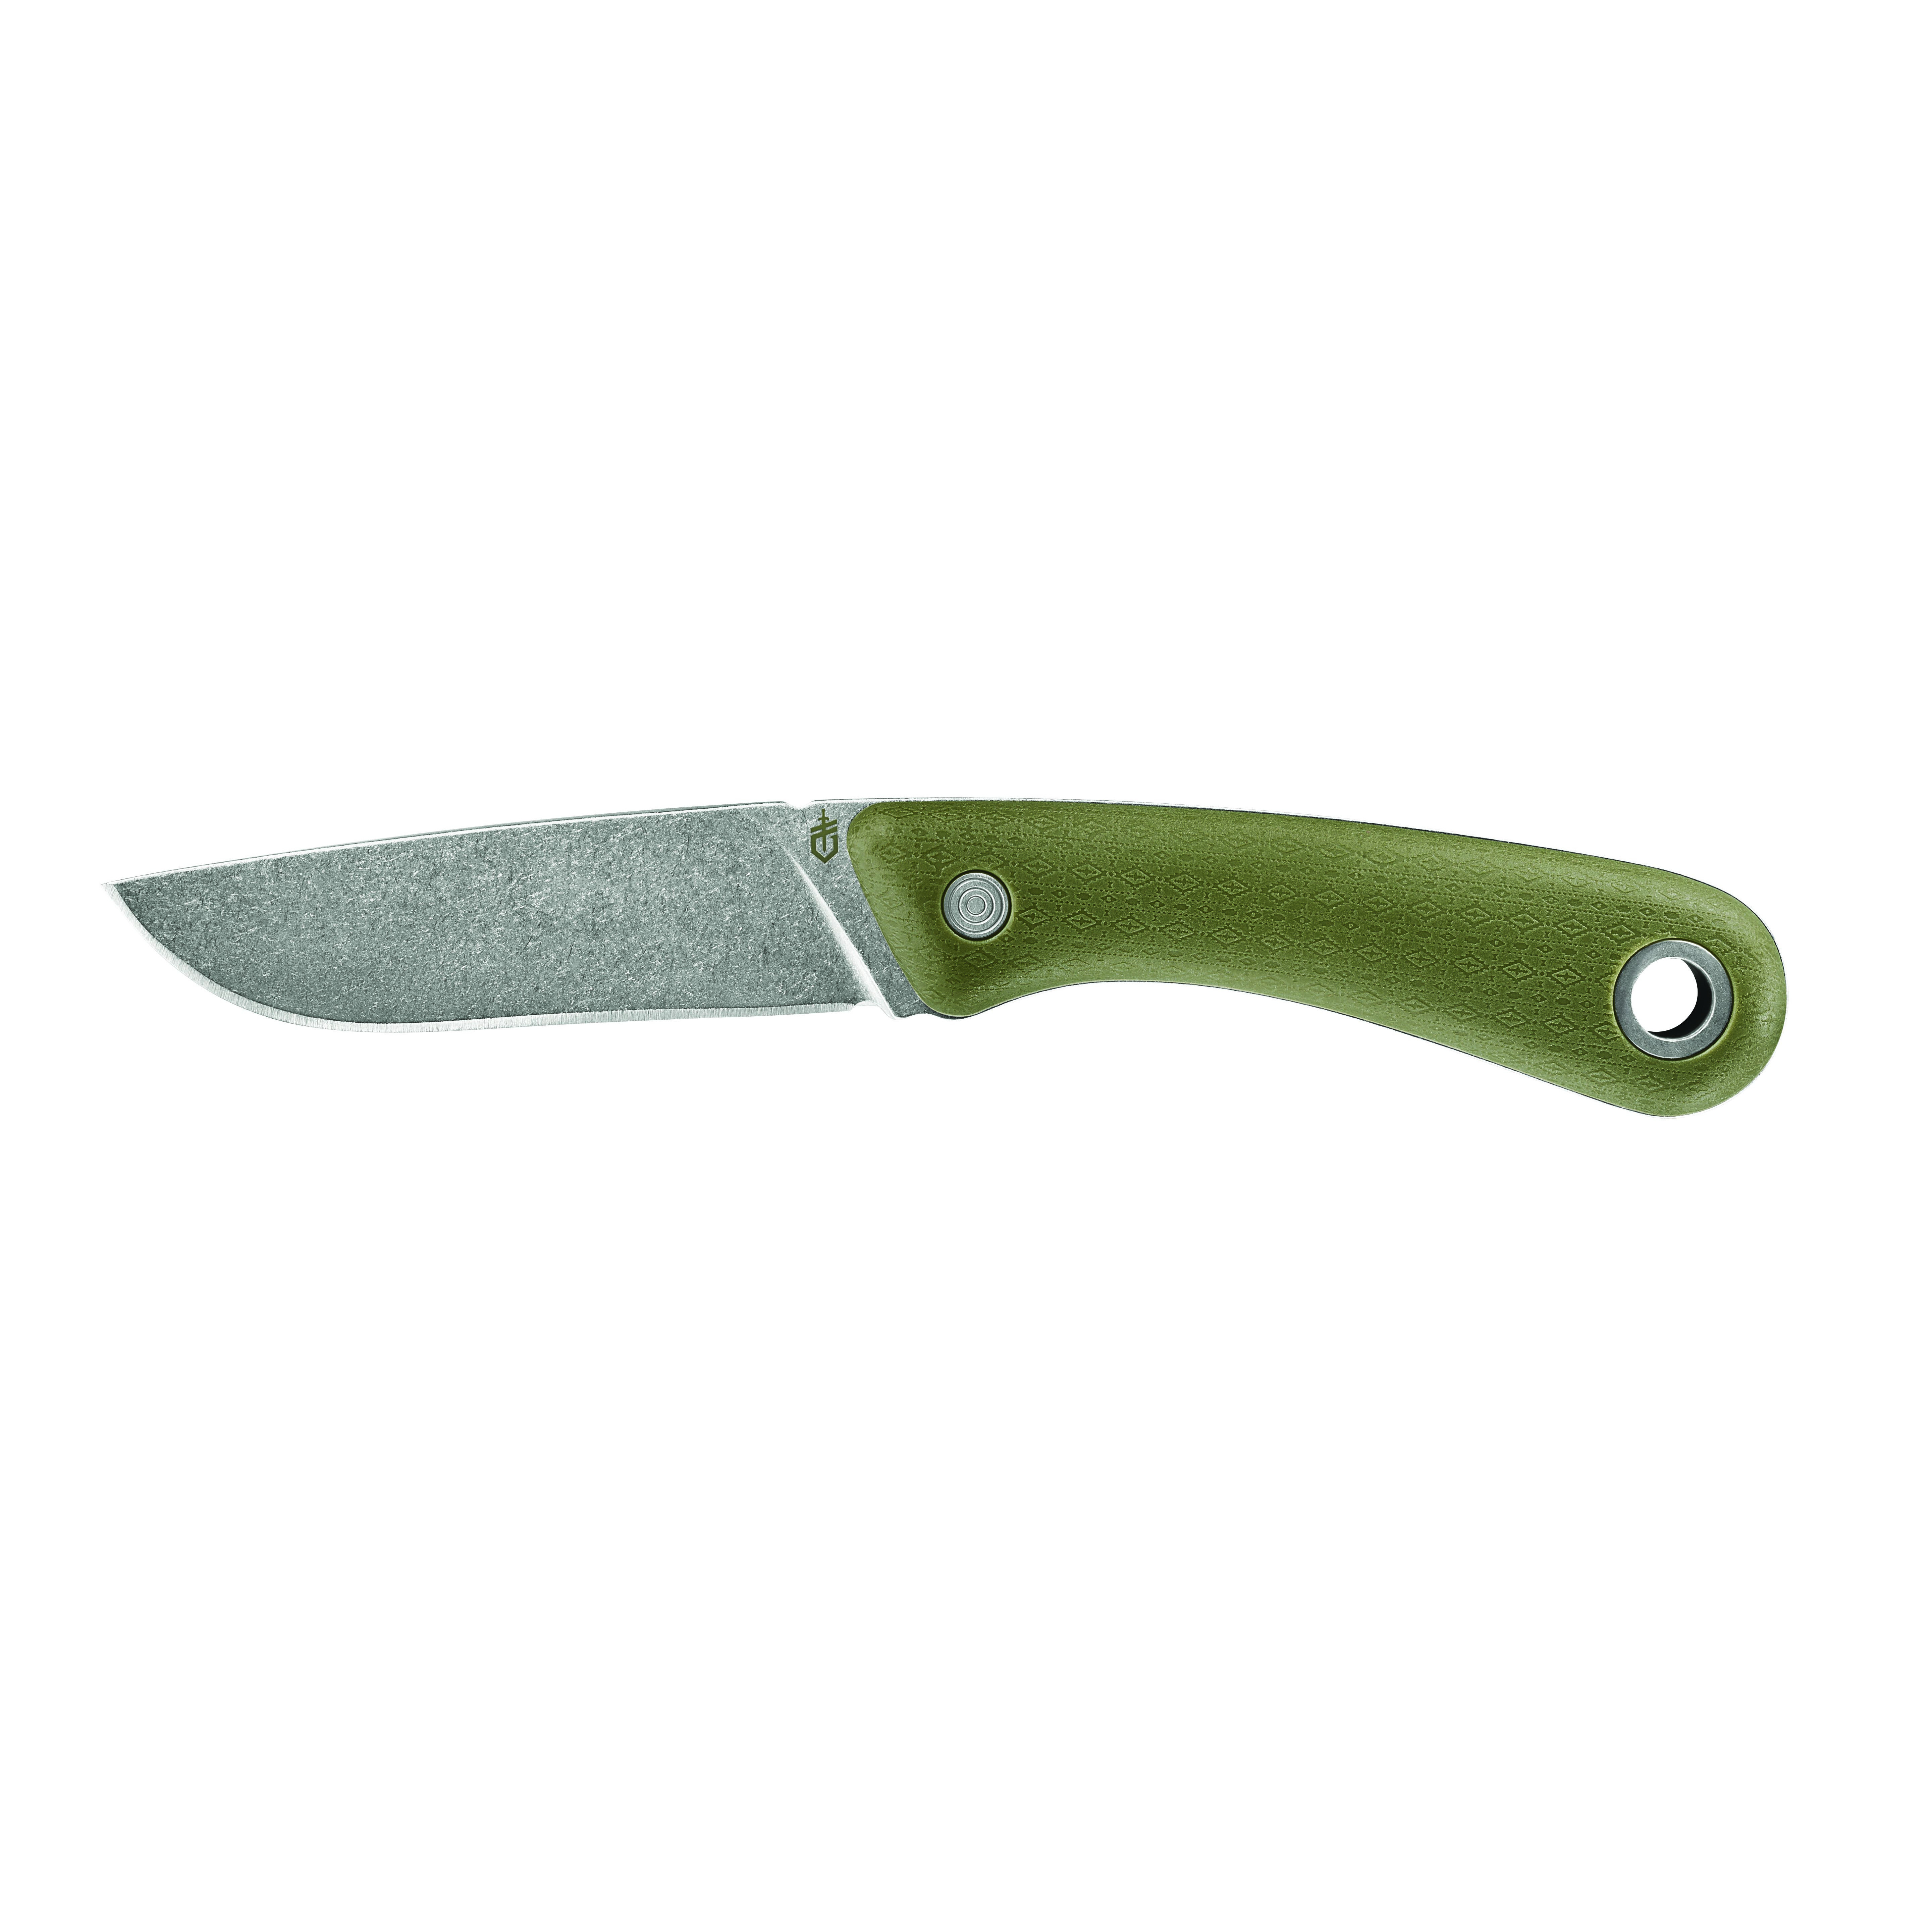 Gerber Spine Compact Fixed Blade Green